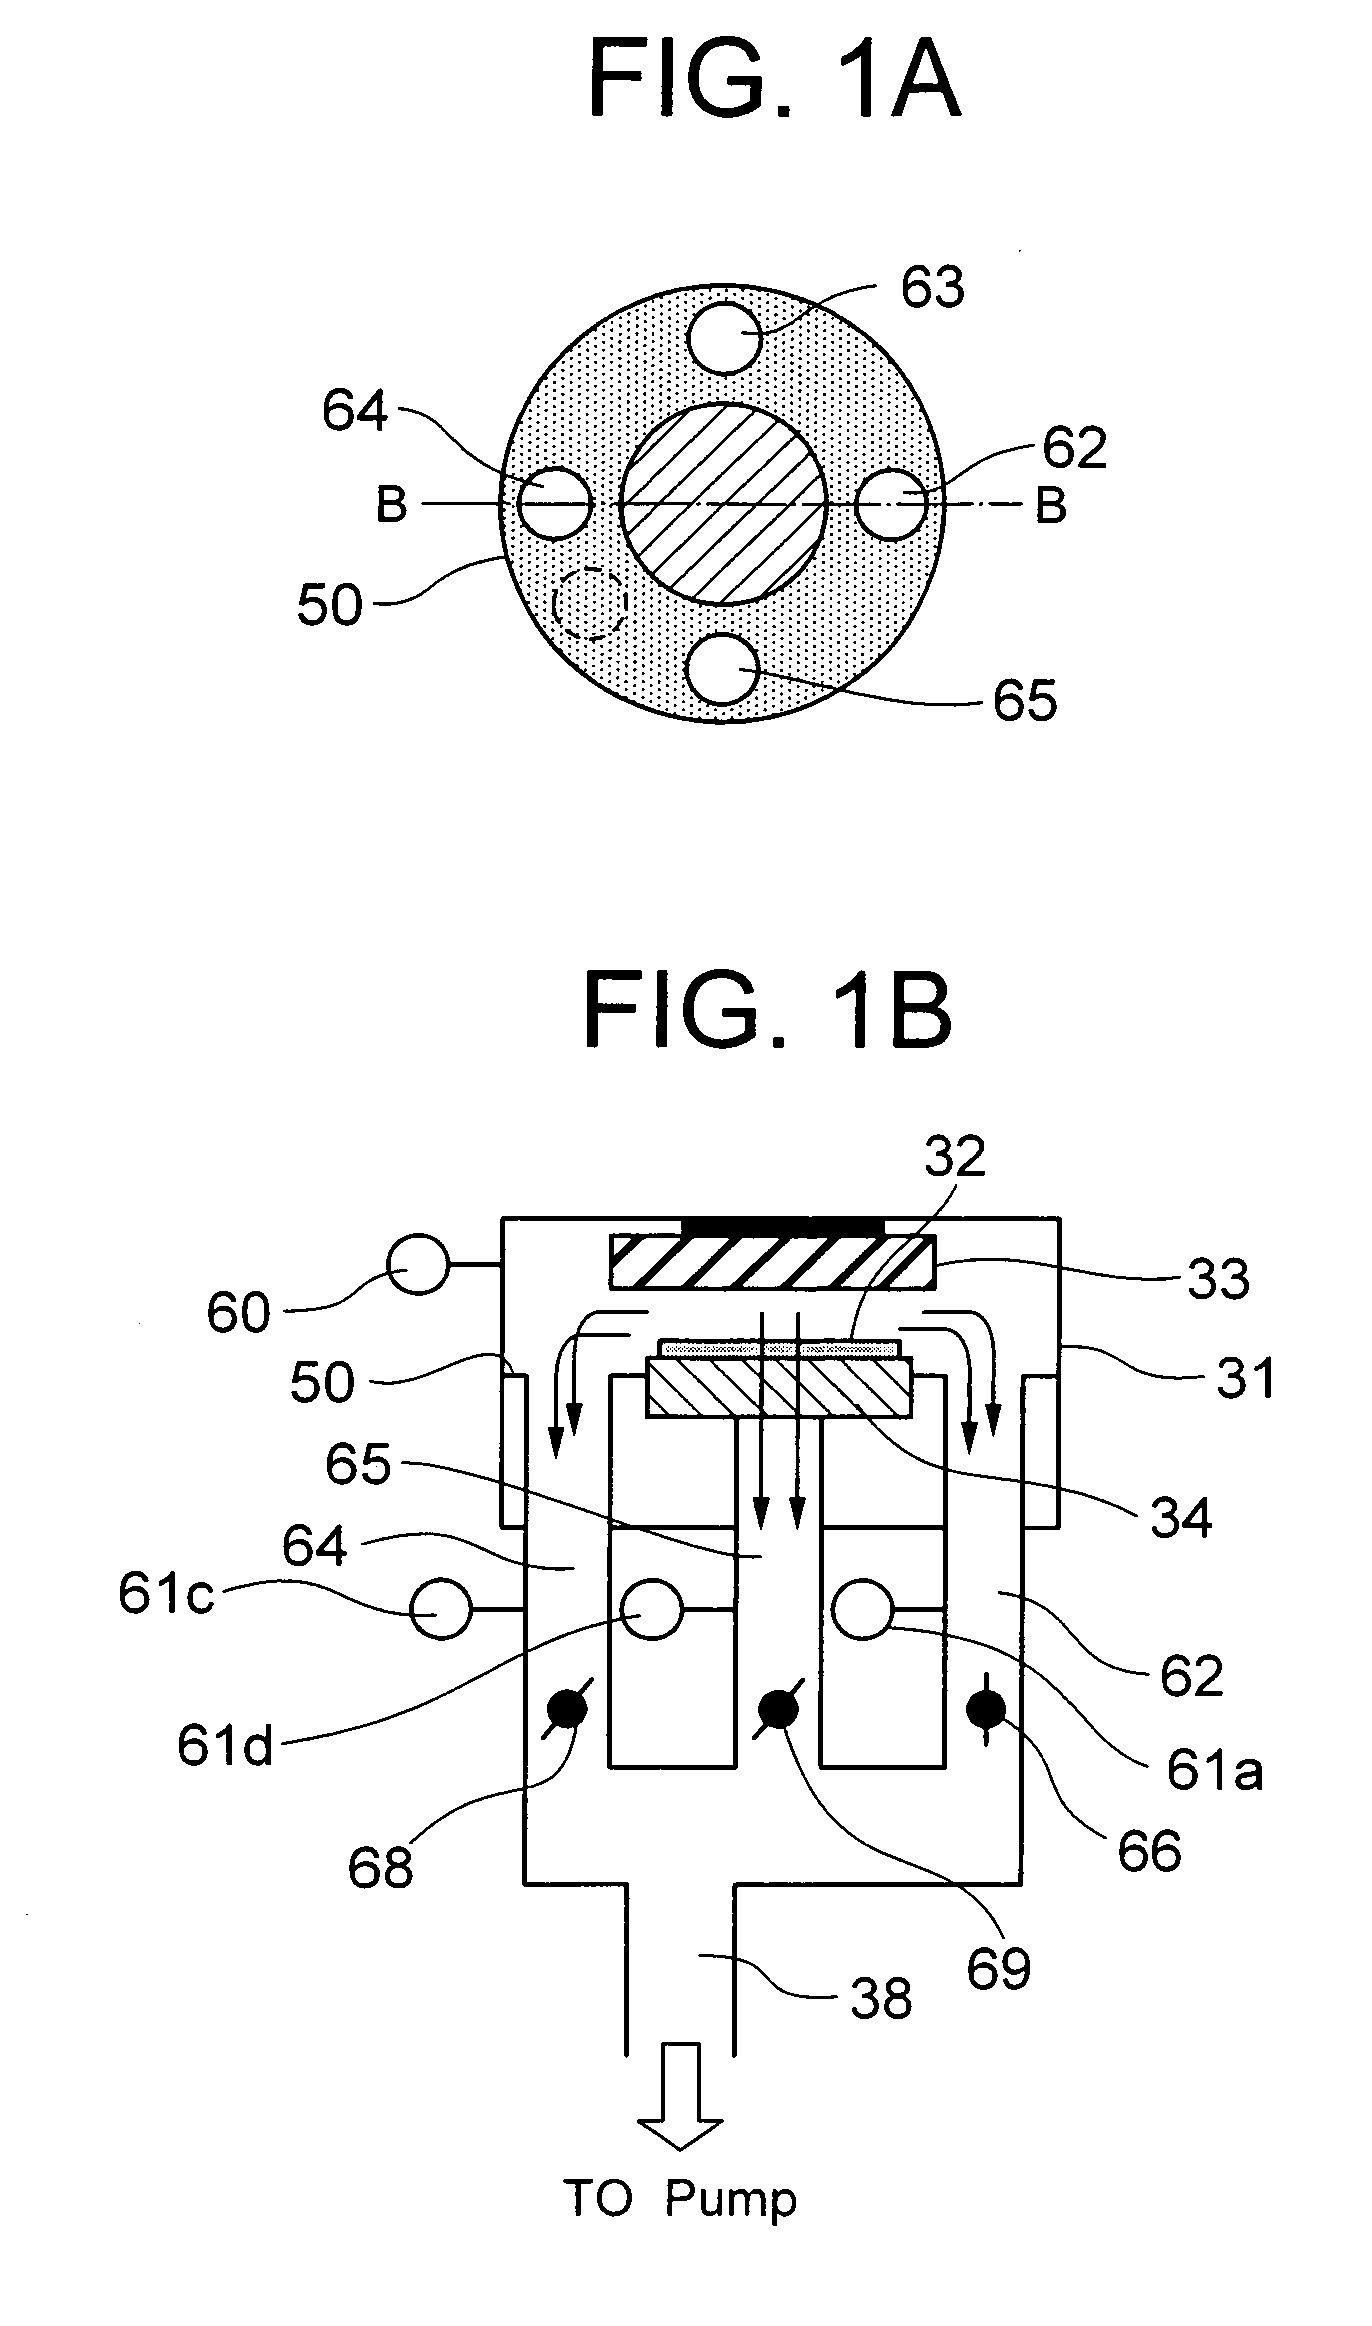 Atomic layer deposition system including a plurality of exhaust tubes